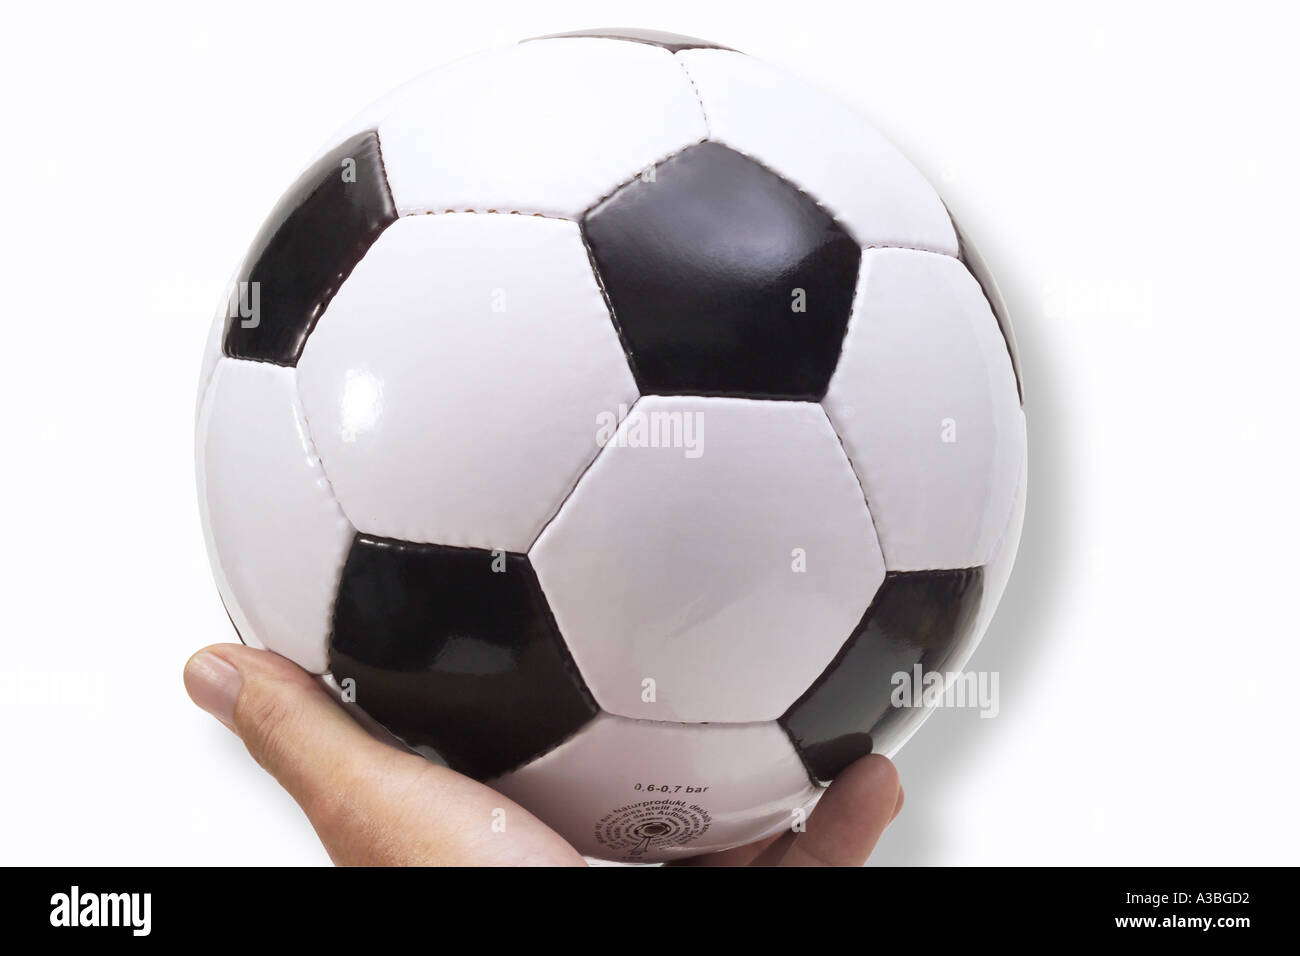 Personne holding soccer ball, close-up Banque D'Images